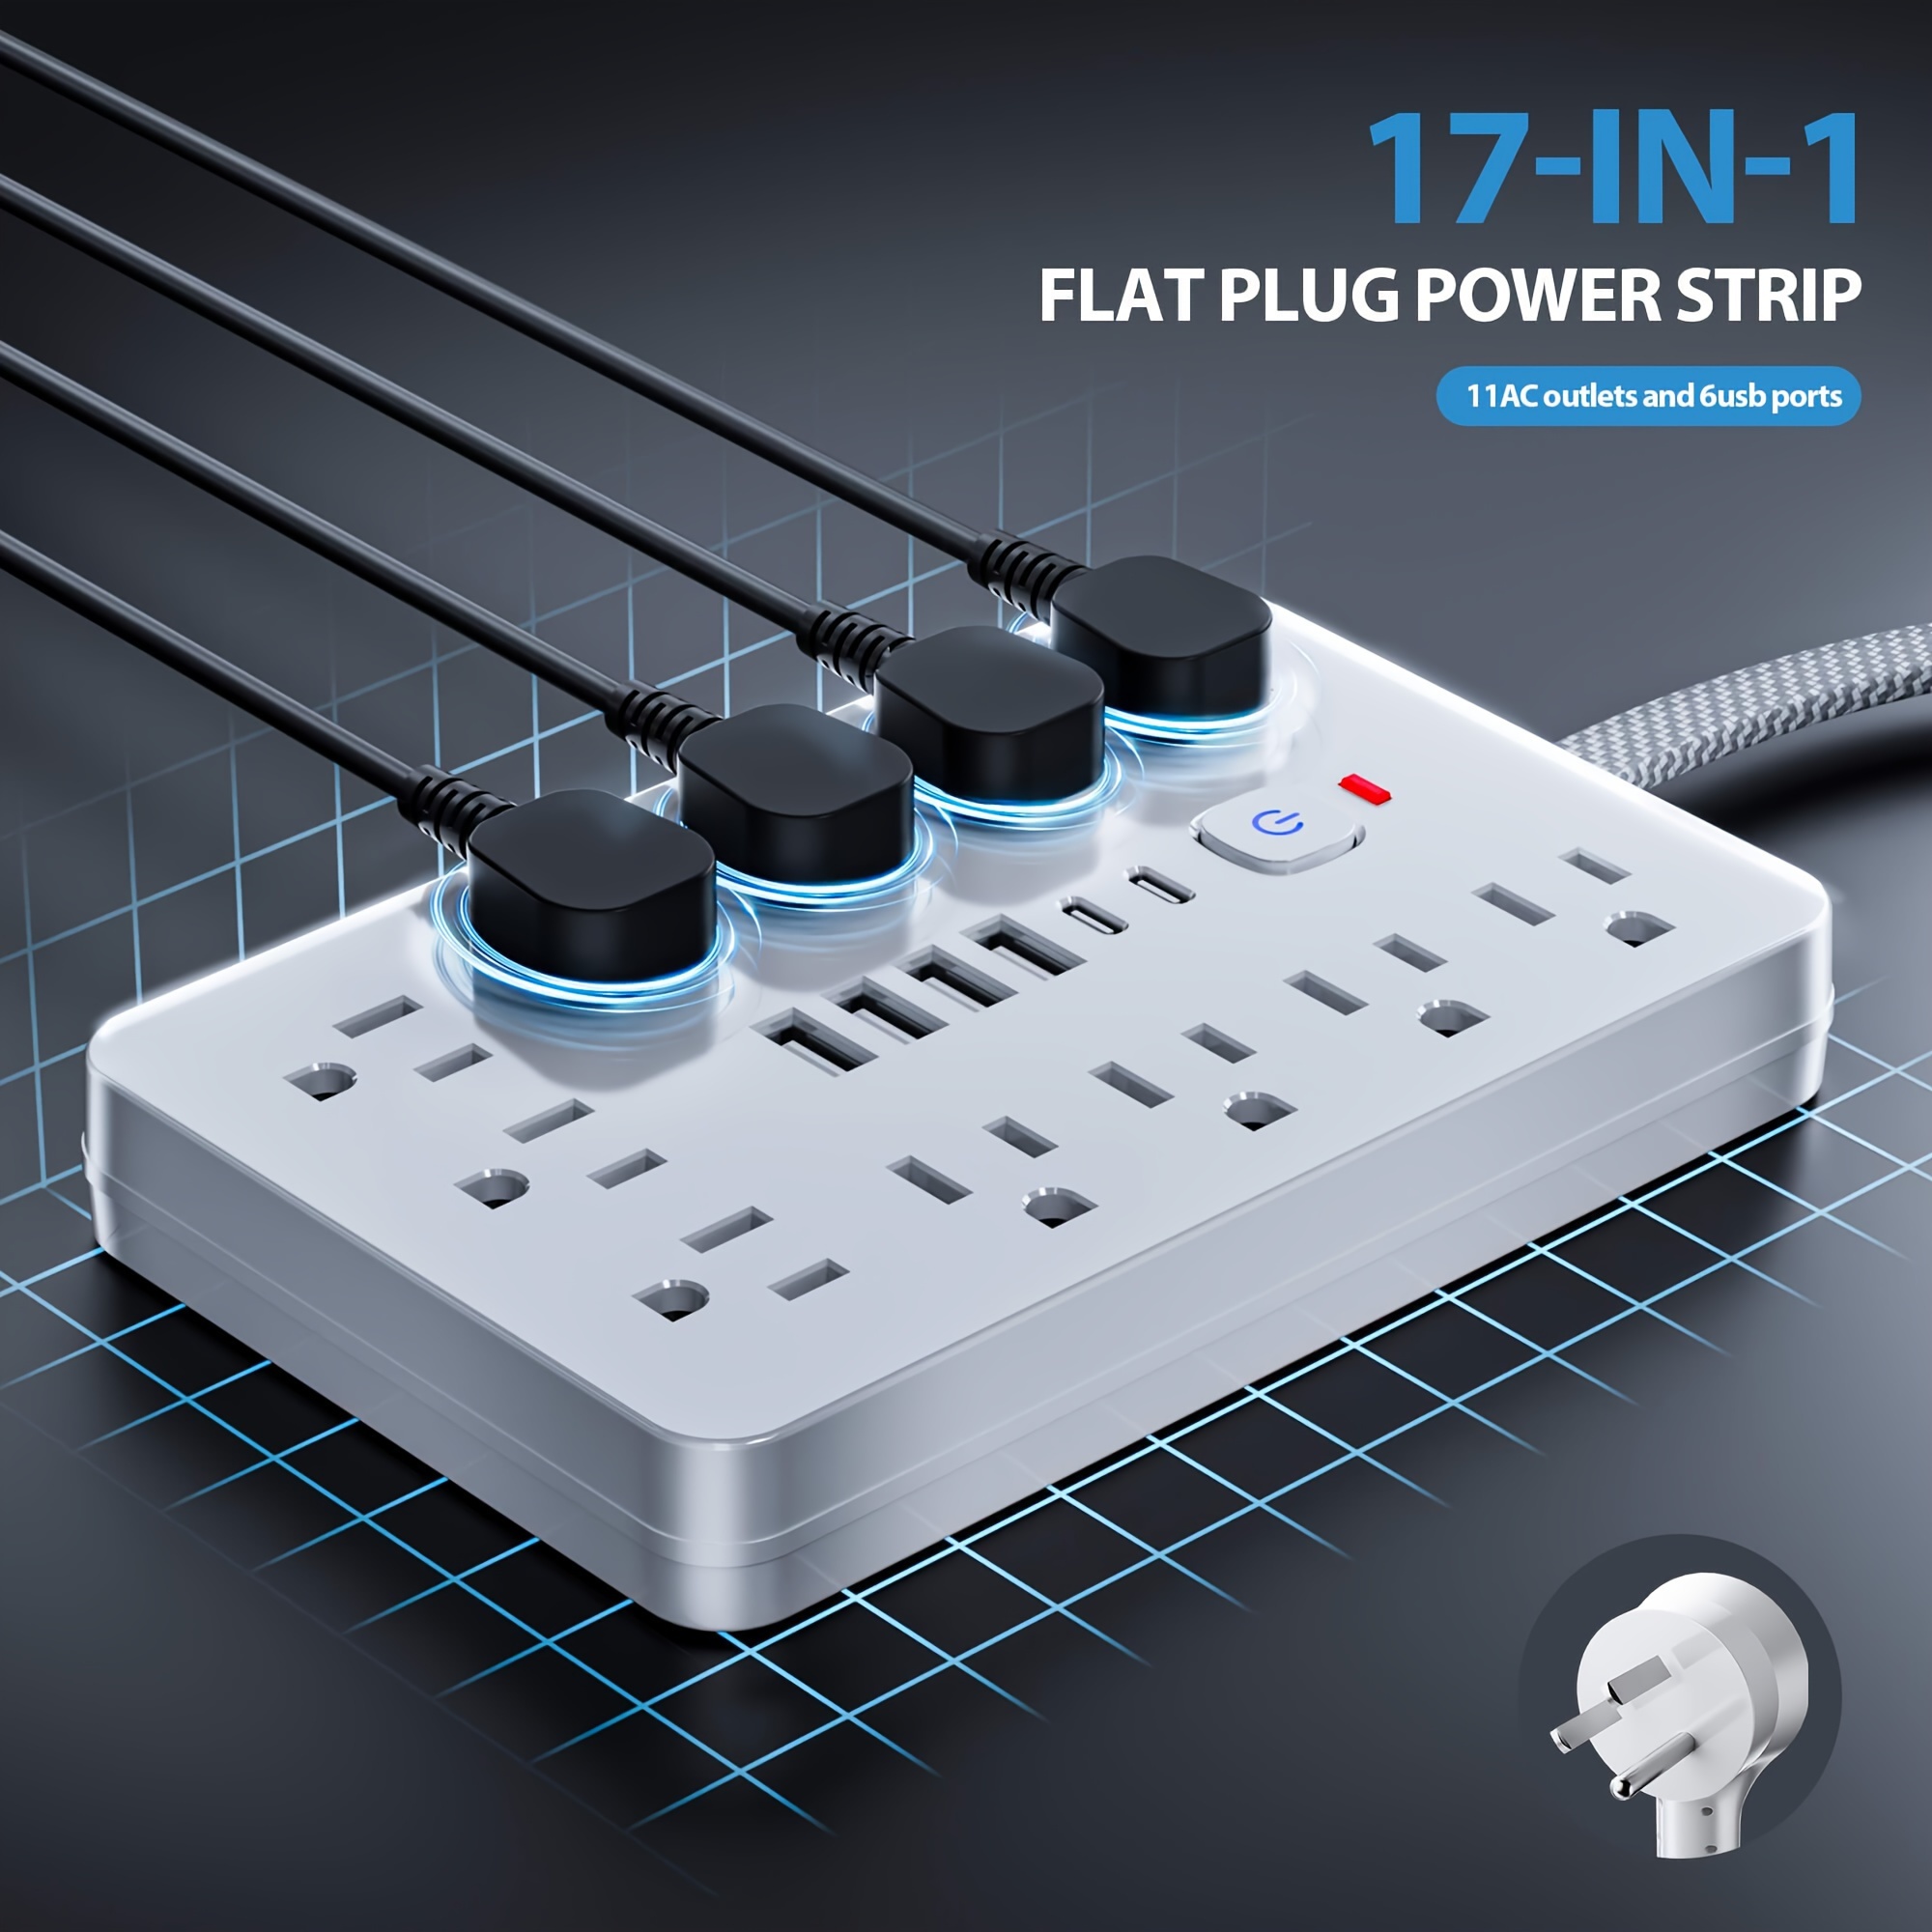 

17-in-1 Protector Power Strip With 10ft Extension Cord, 11 Ac Outlets & 6 Usb Ports (4 Usb-a + 2 Usb-c), 1875w Flat Plug, Compact Size Wall Mount Charging Station For Office, School, Dorm